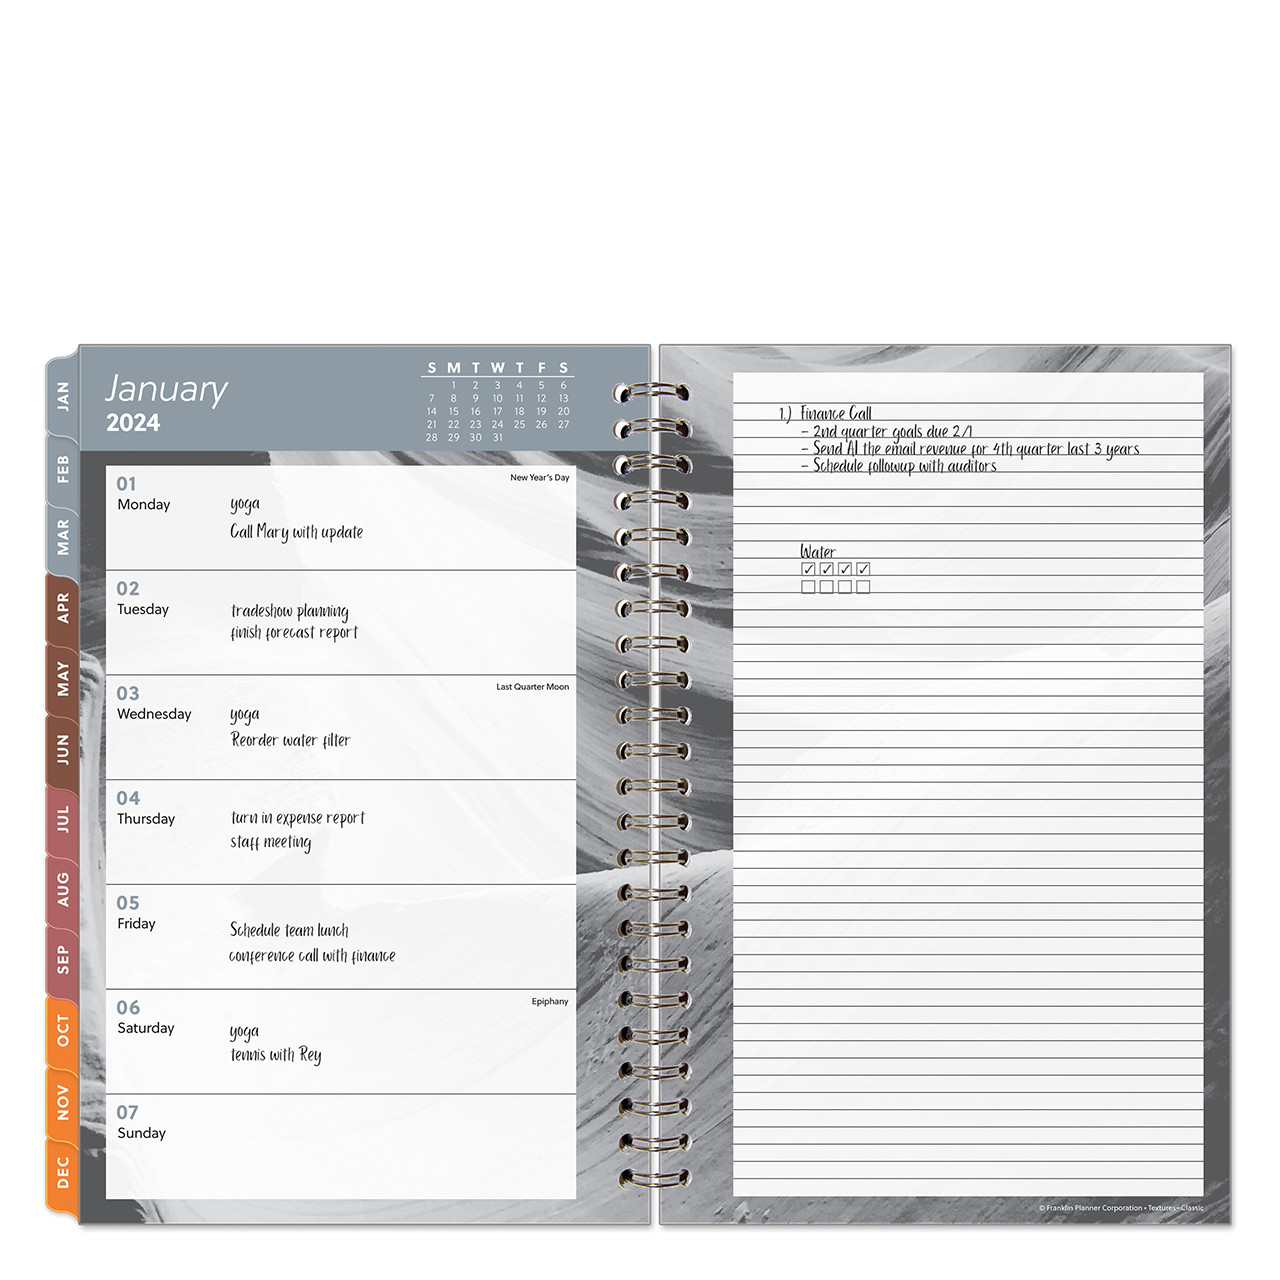 Brighton Simulated Leather Zipper Wire-bound Cover - Franklin Planner